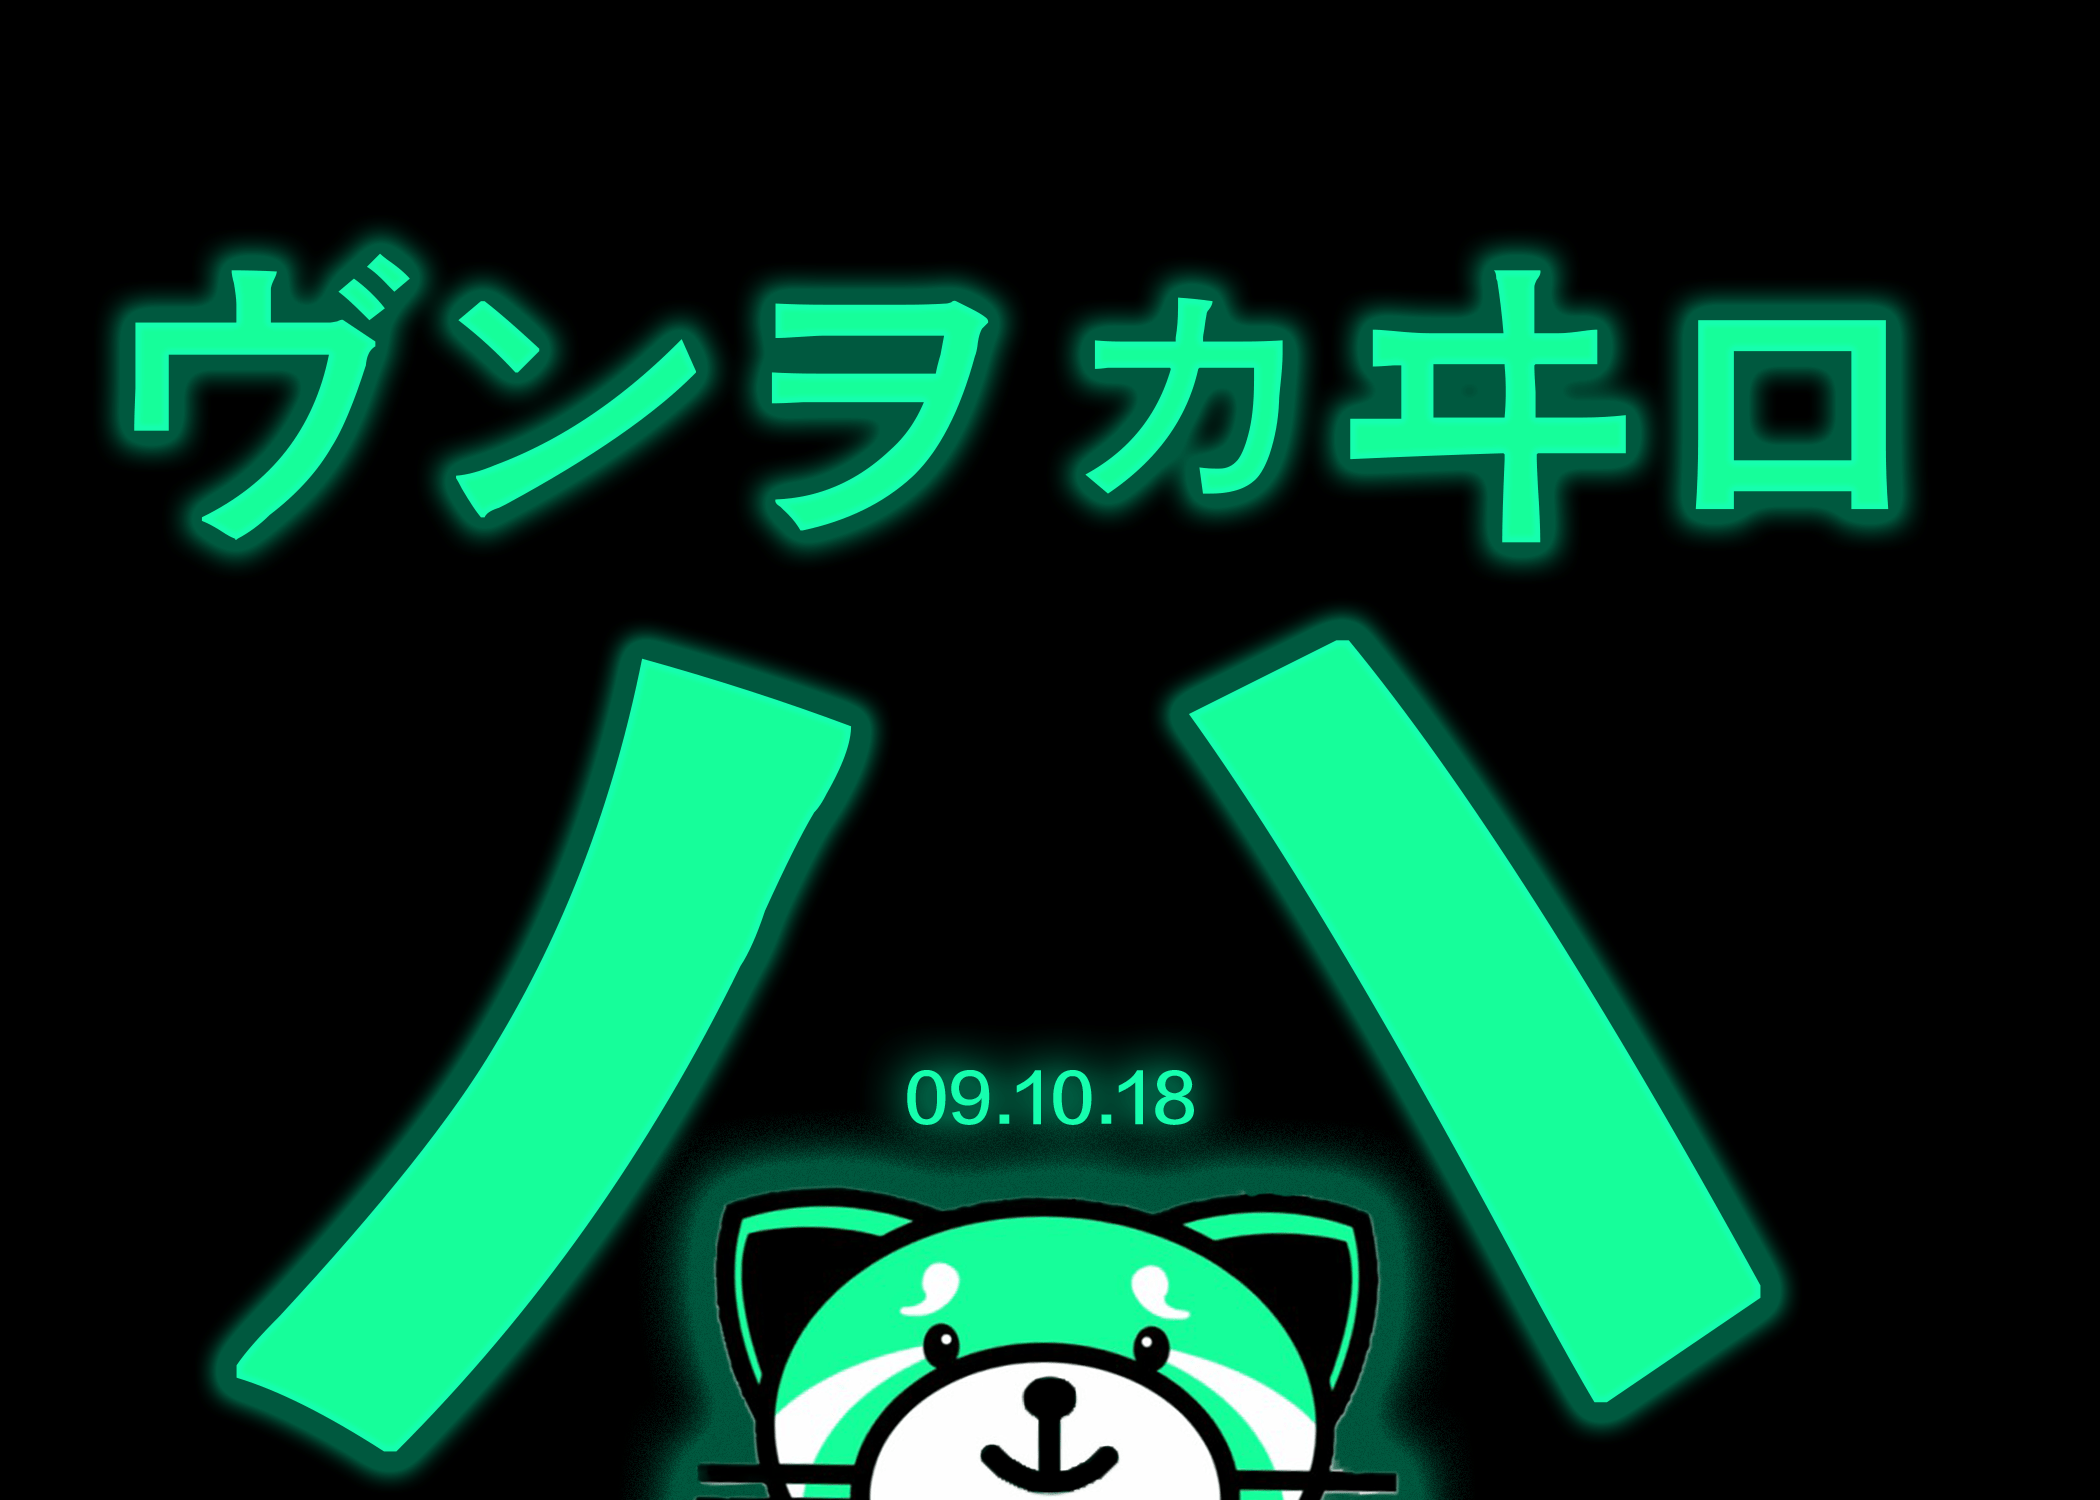 The Weeknd Kiss Land Wallpapers - Top Free The Weeknd Kiss Land